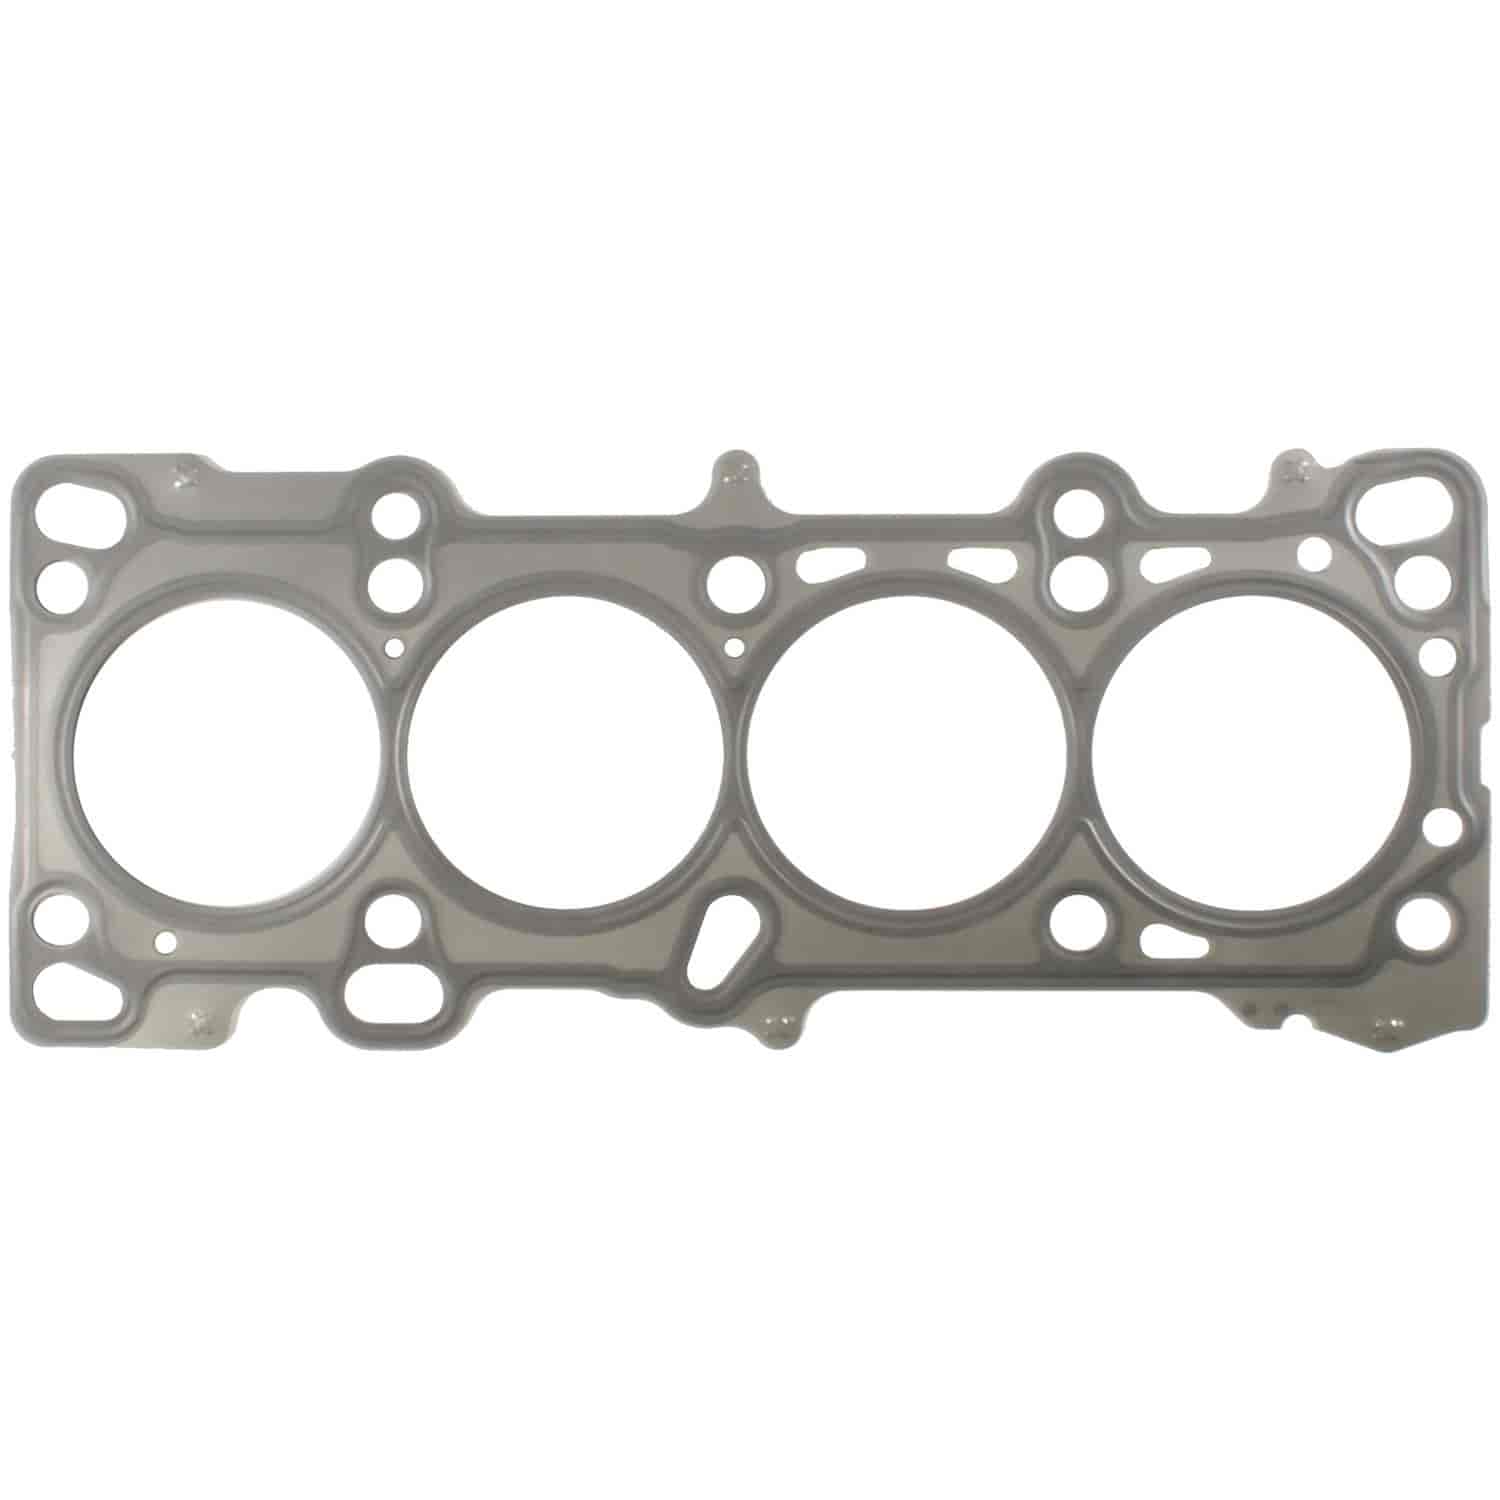 Cylinder Head Gasket MAZDA 1.6L B6-ZE 2001-2003 from serial # 549027